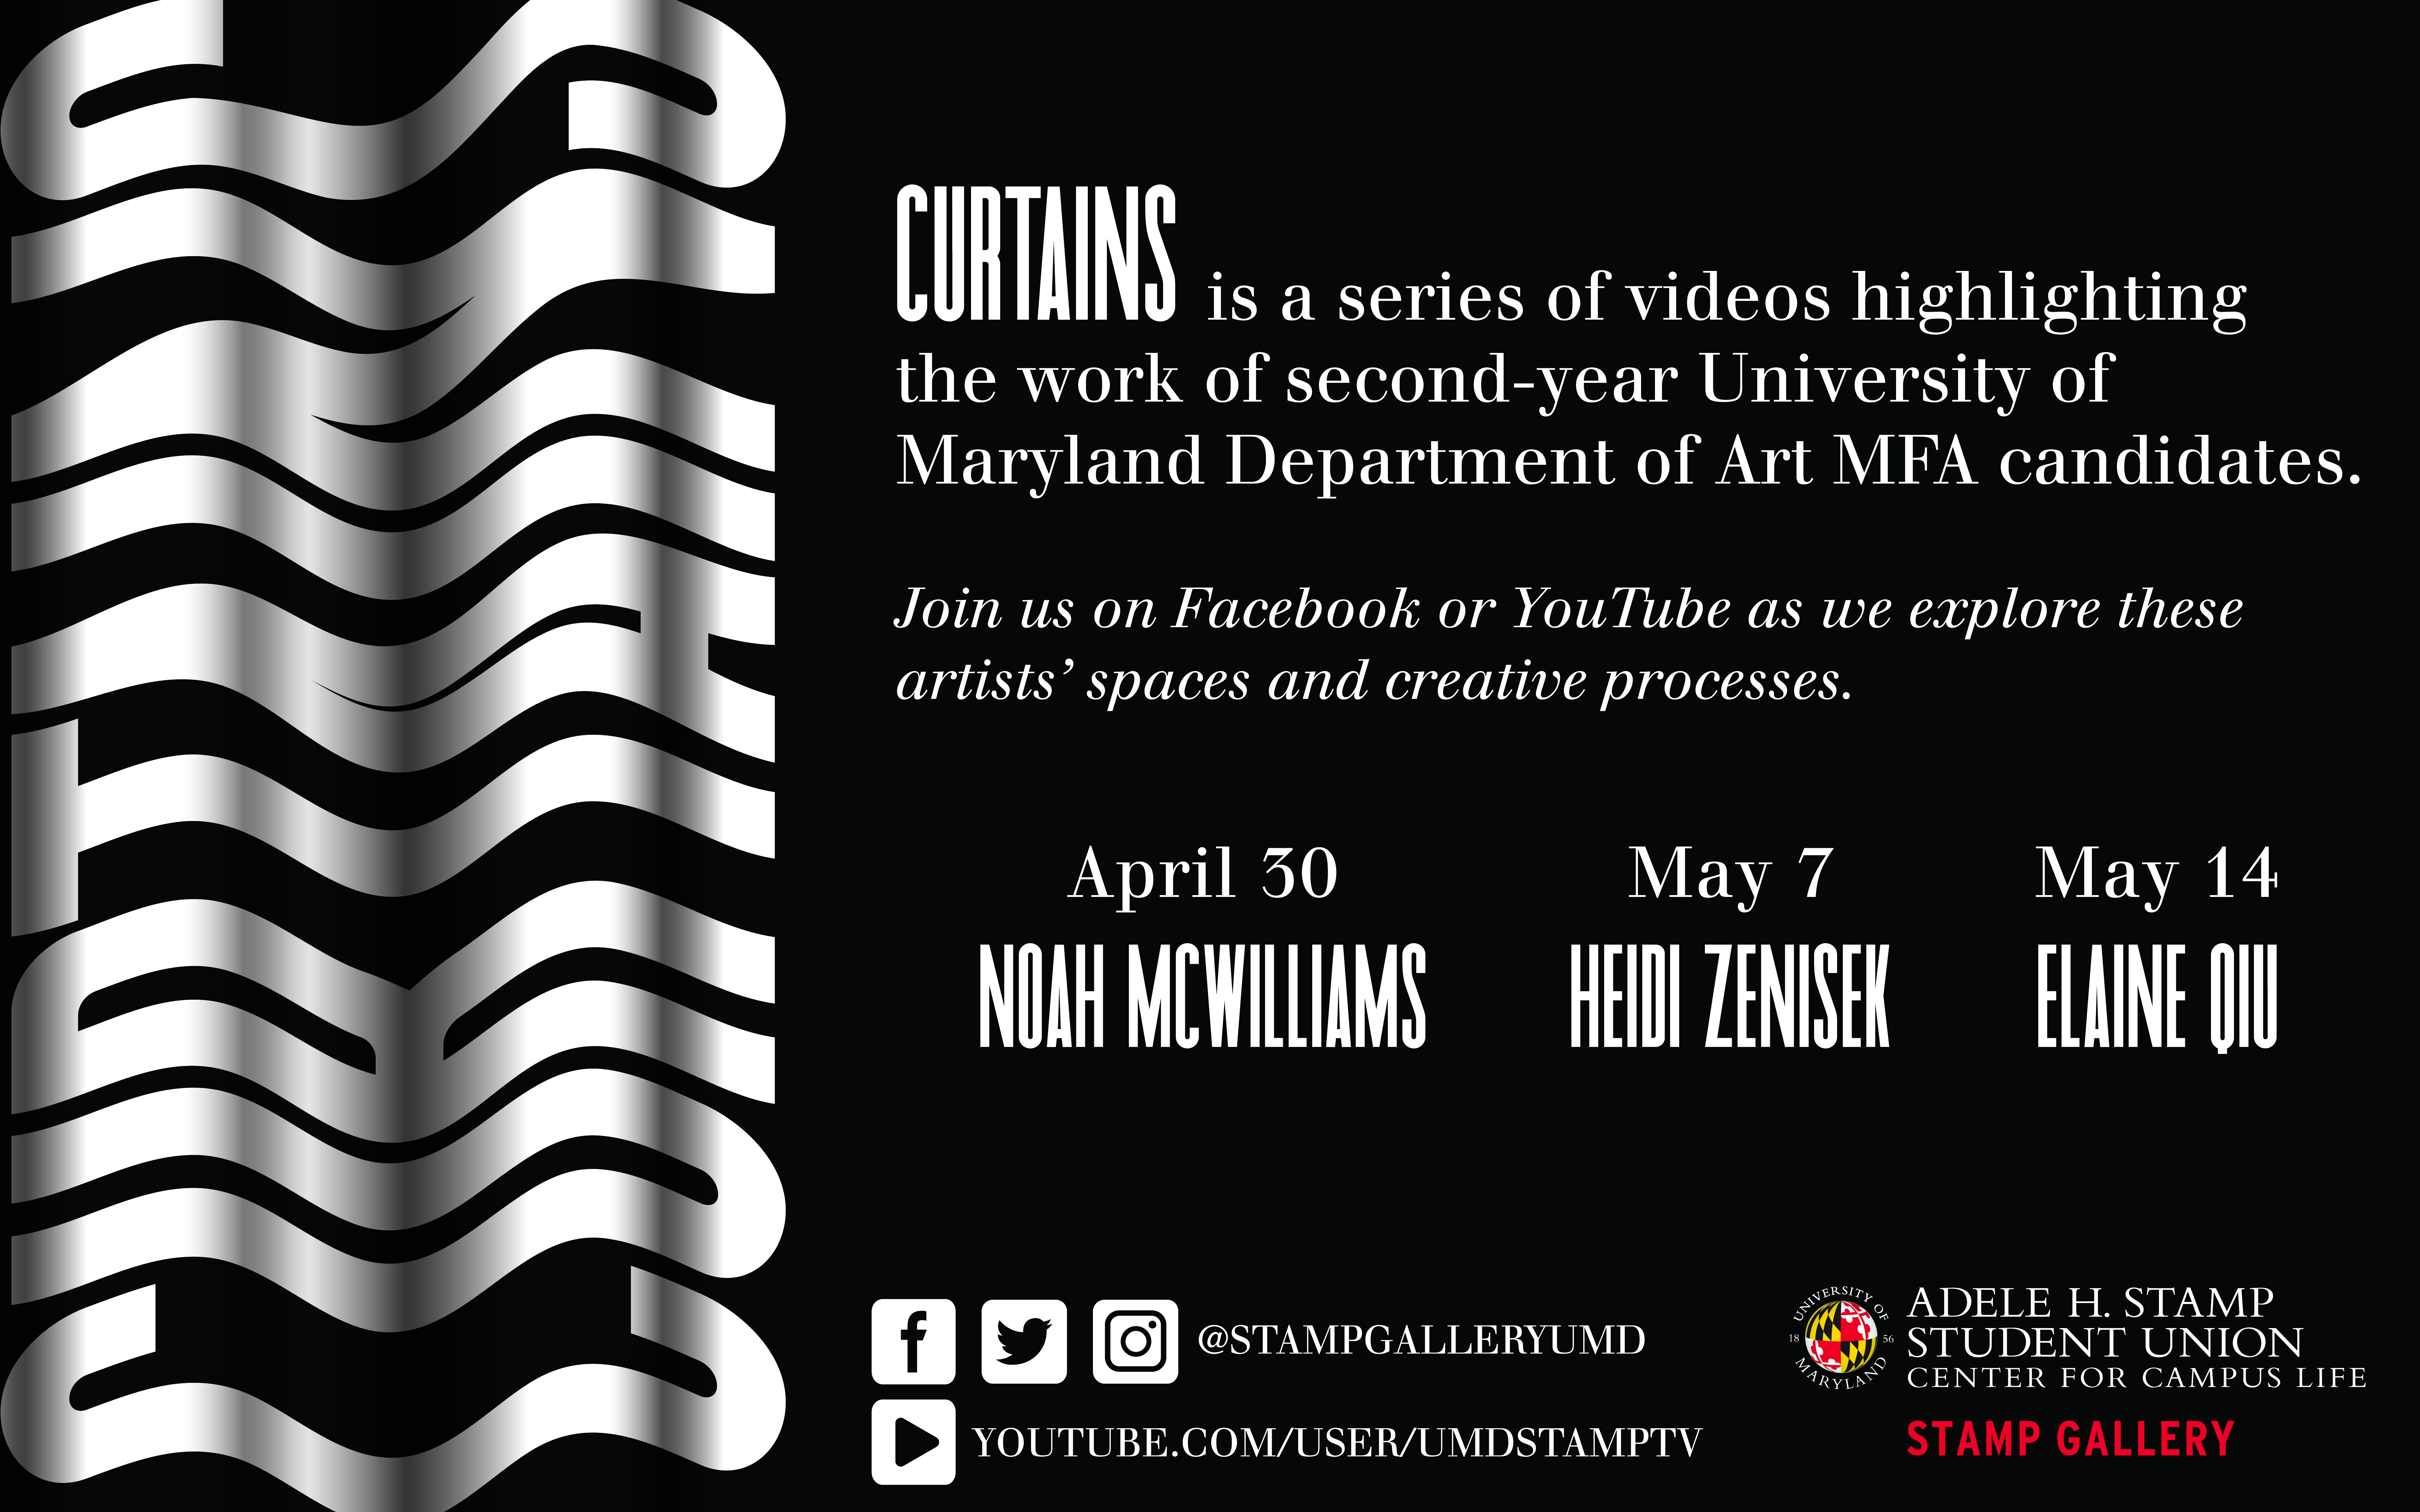 "Curtains: A series of videos highlighting the University of Maryland's second- year MFA Candidates"